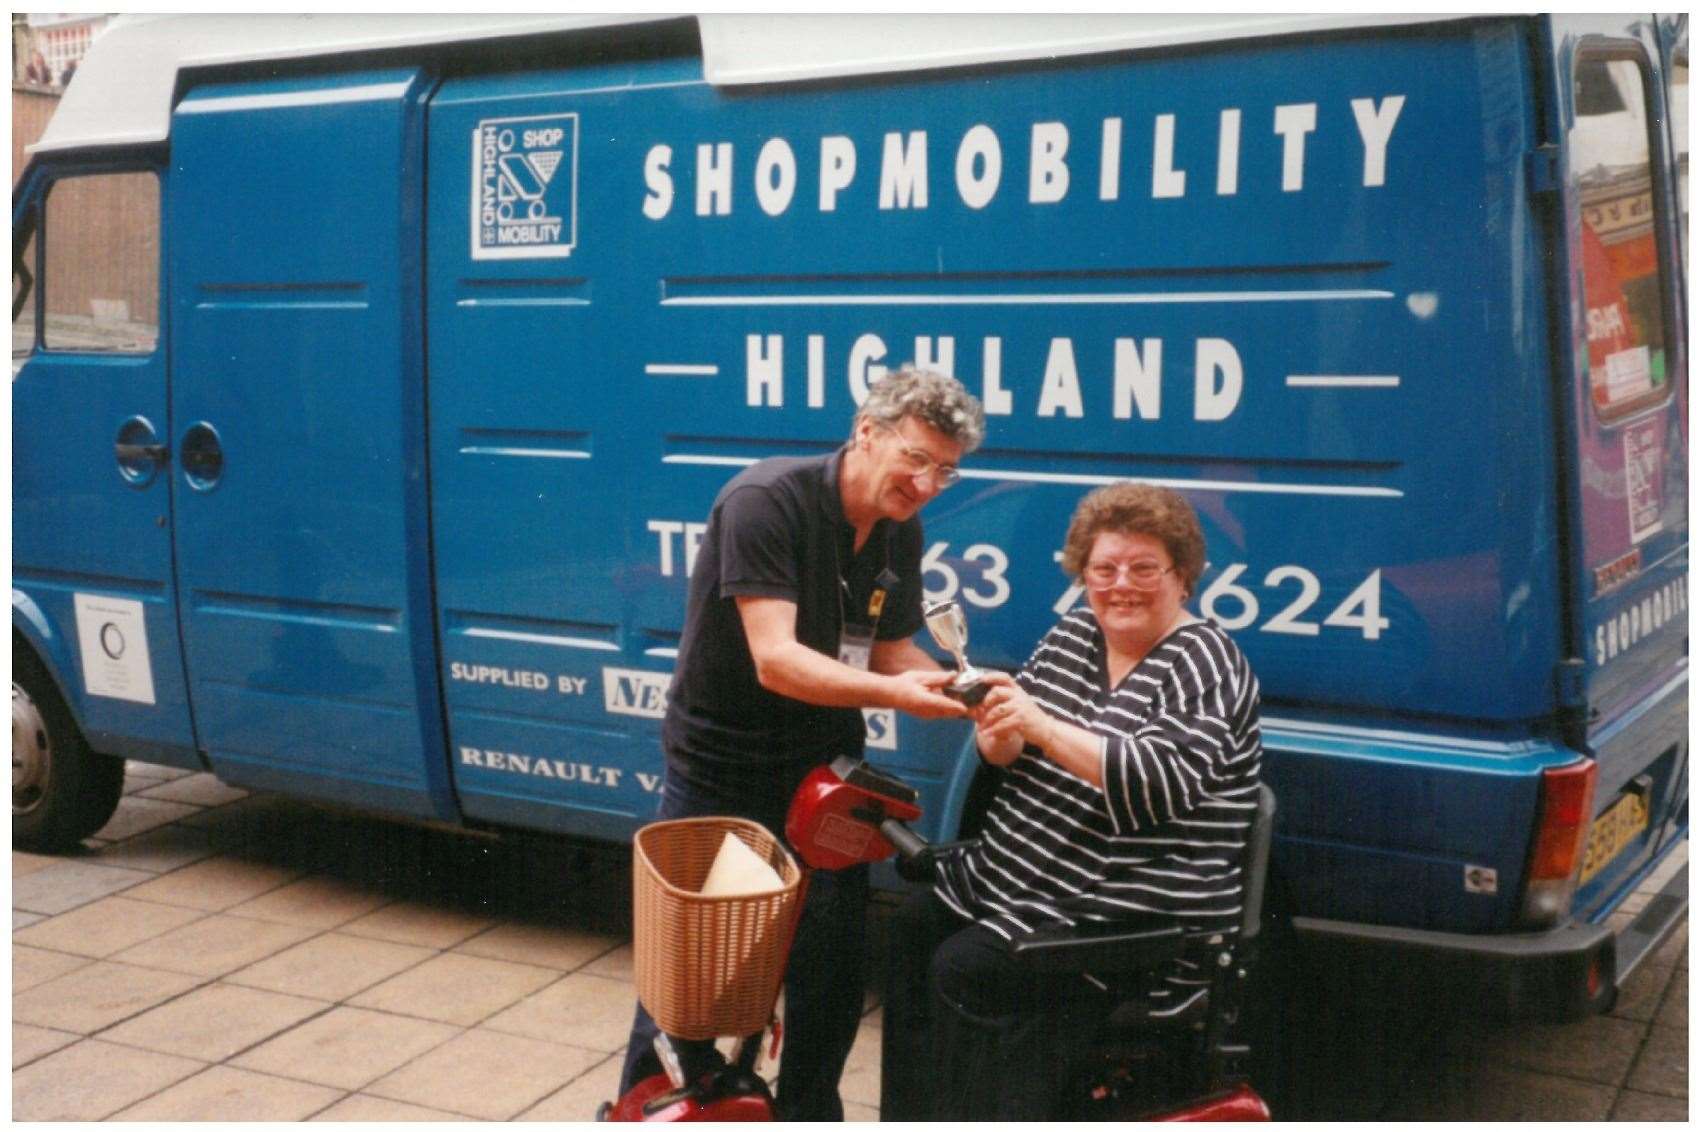 Former manager Ken MacKay with Shopmobility Highland's 2000th member Ann O'Brien in 1998.